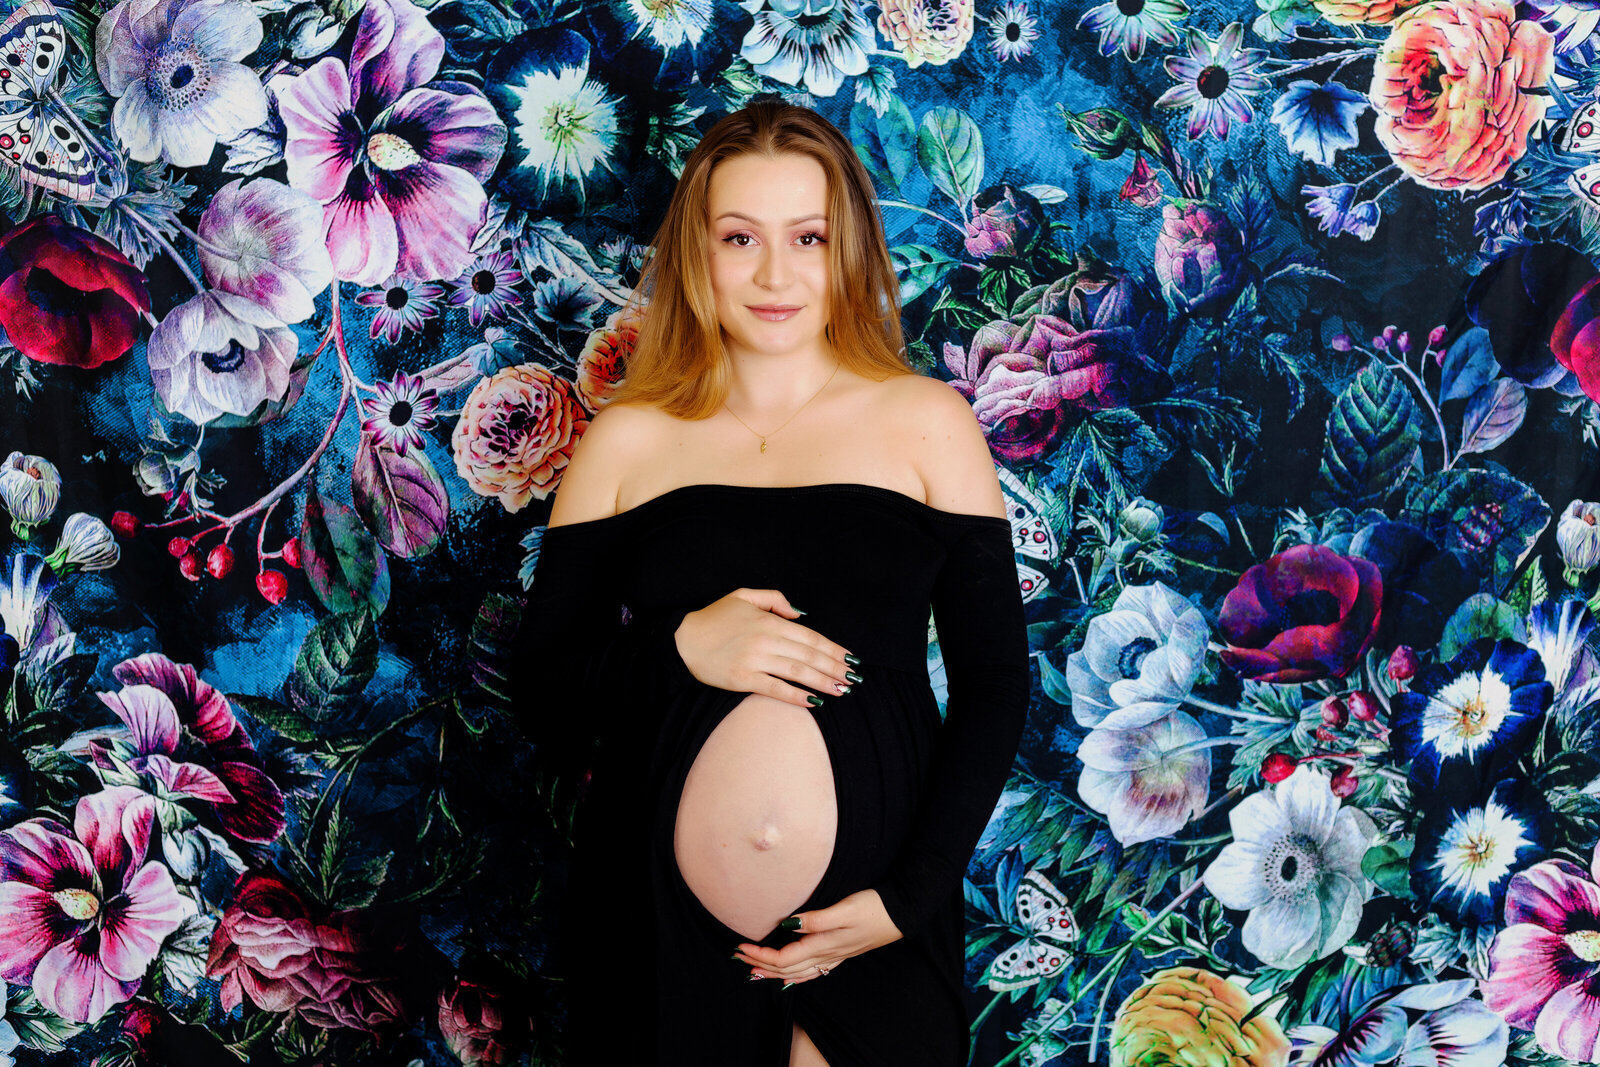 Maternity Photographer, a woman wears a dress that exposes her pregnant belly